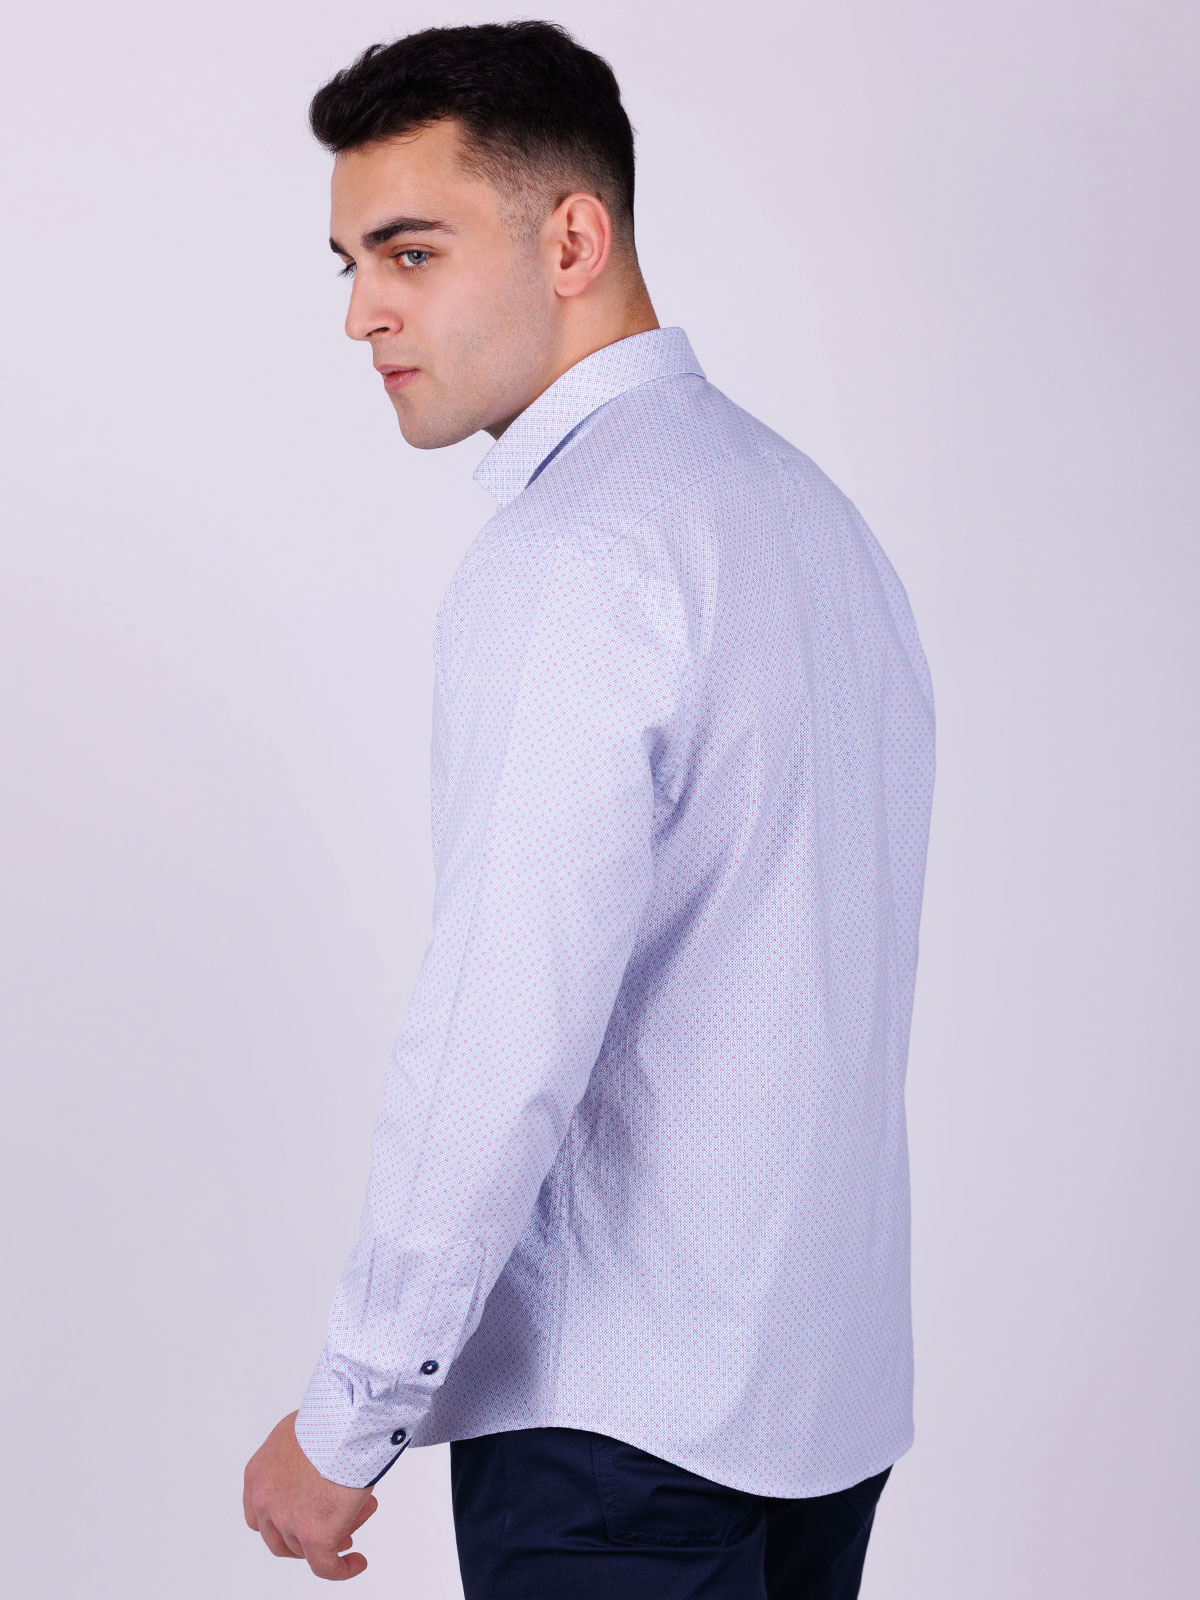 White shirt with blue dots and red figur - 21526 € 30.93 img4